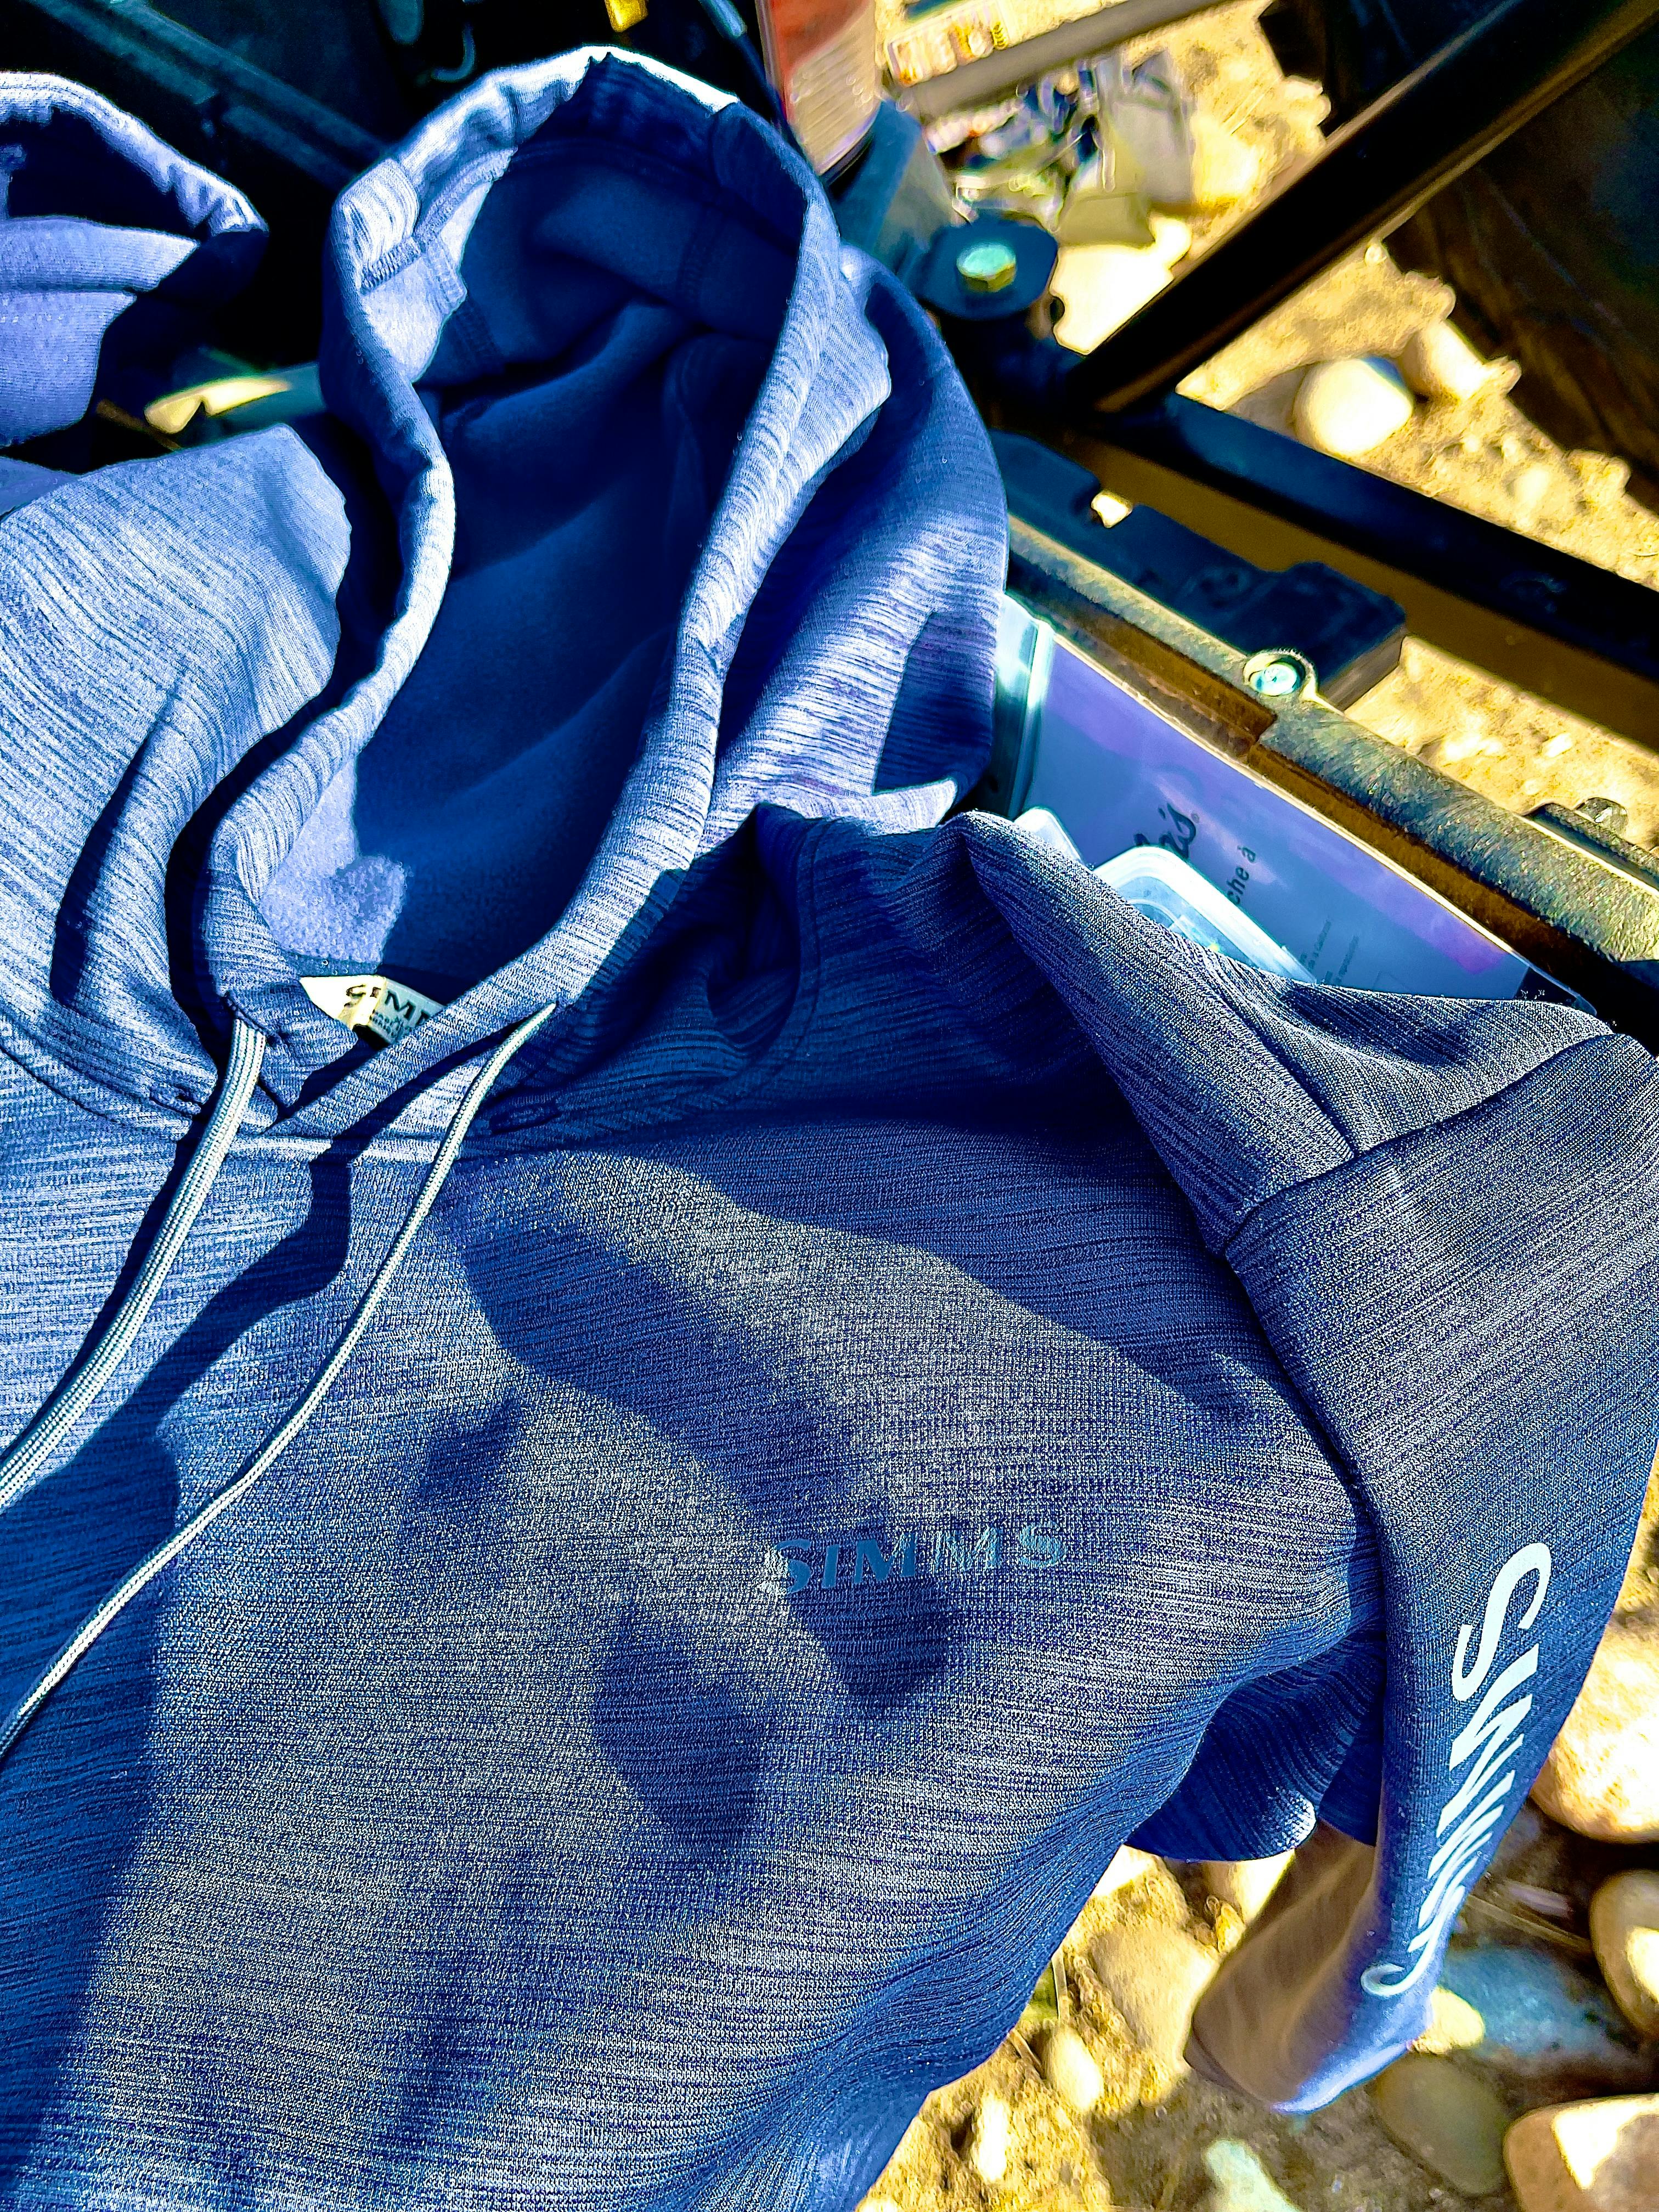 The Simms Challenger Hoody and Print Hooded Sweatshirts.